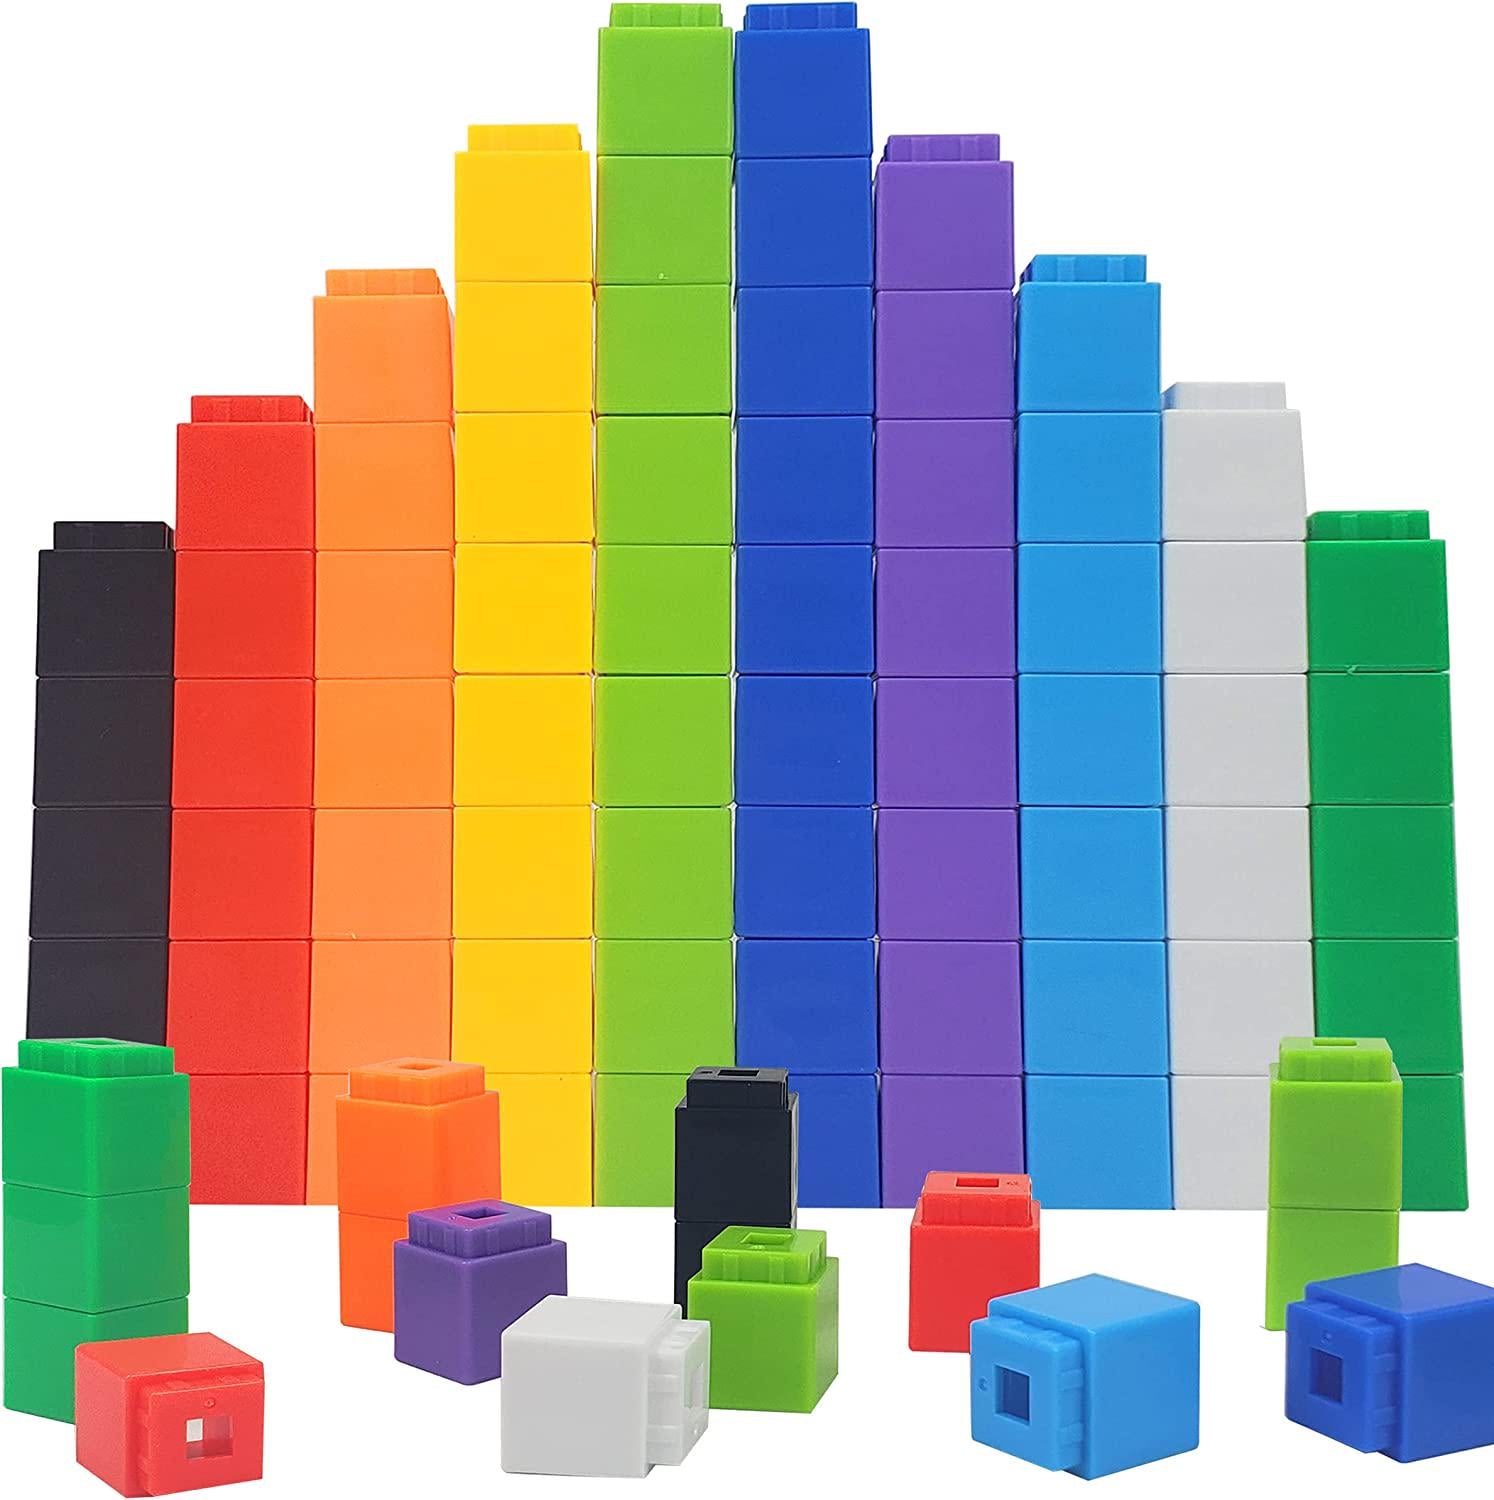 KUTOI, KUTOI Math Manipulatives Counting Cubes, Educational Number Blocks, Classroom Toys Kindergarten Learning Materials Homeschool Supplies,Set of 100 Math Cubes for Kids Ages 3+